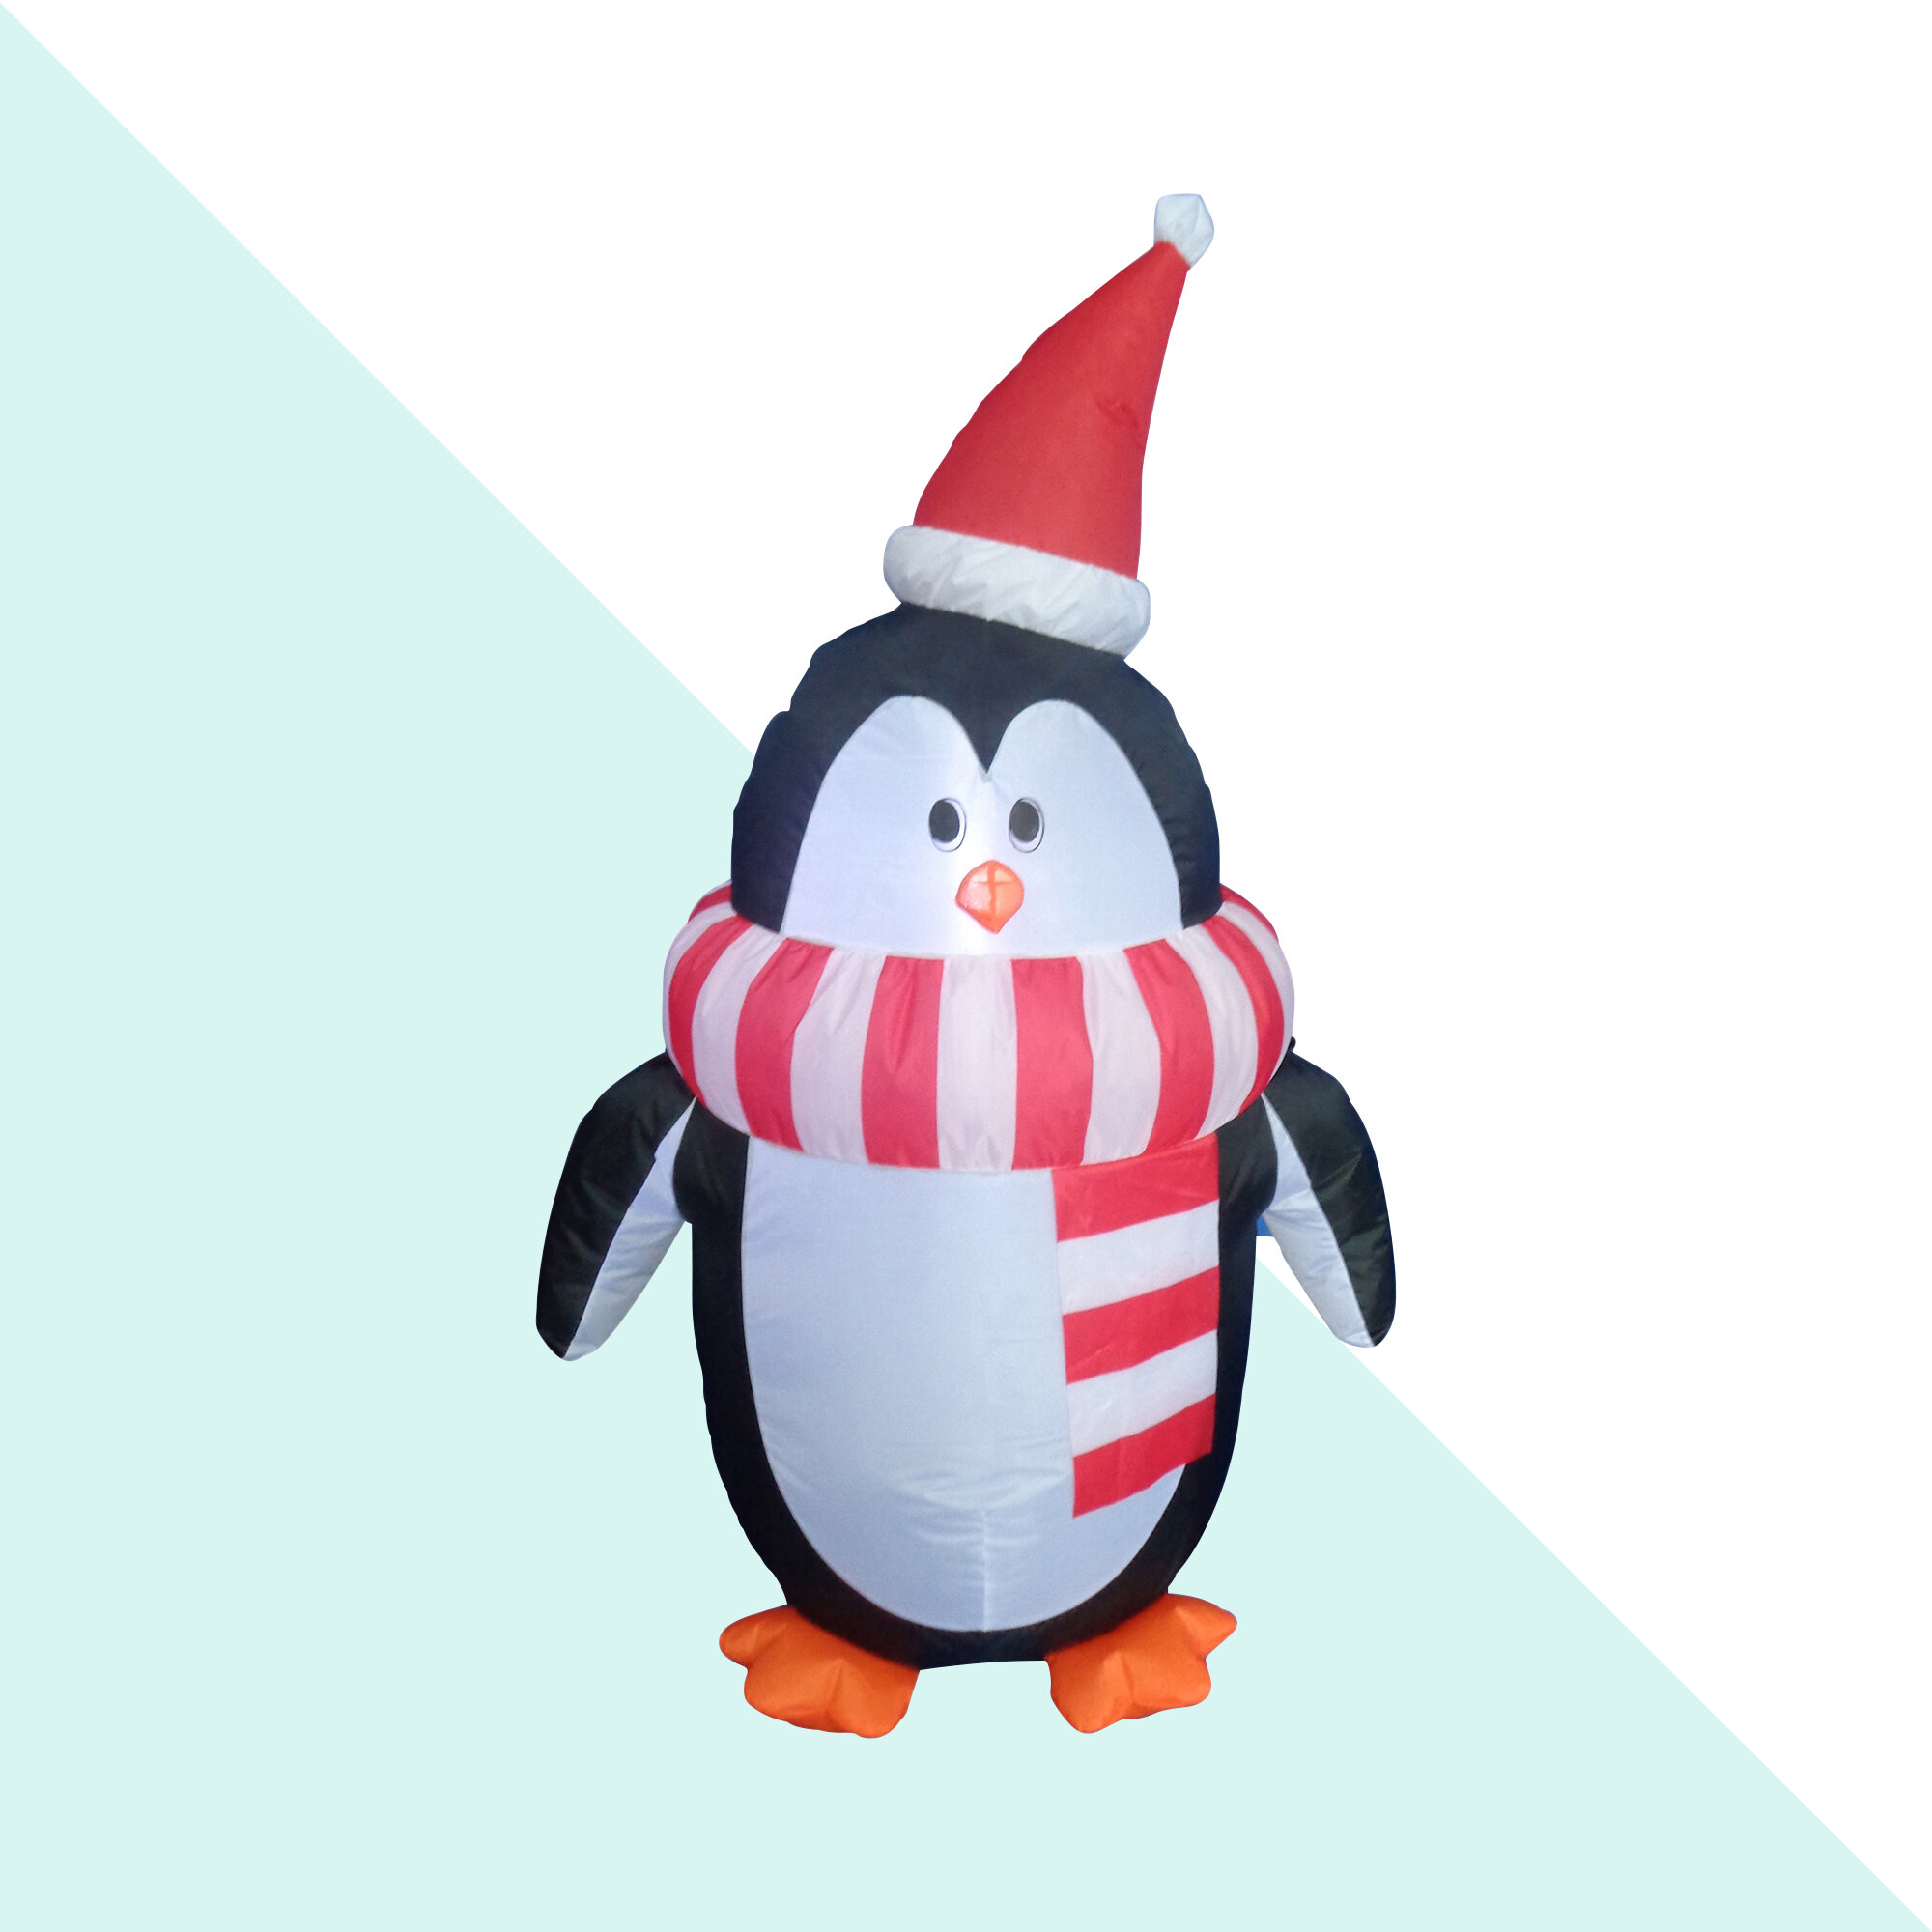 Cute happy joyful Christmas penguin in cozy sweater and scarf